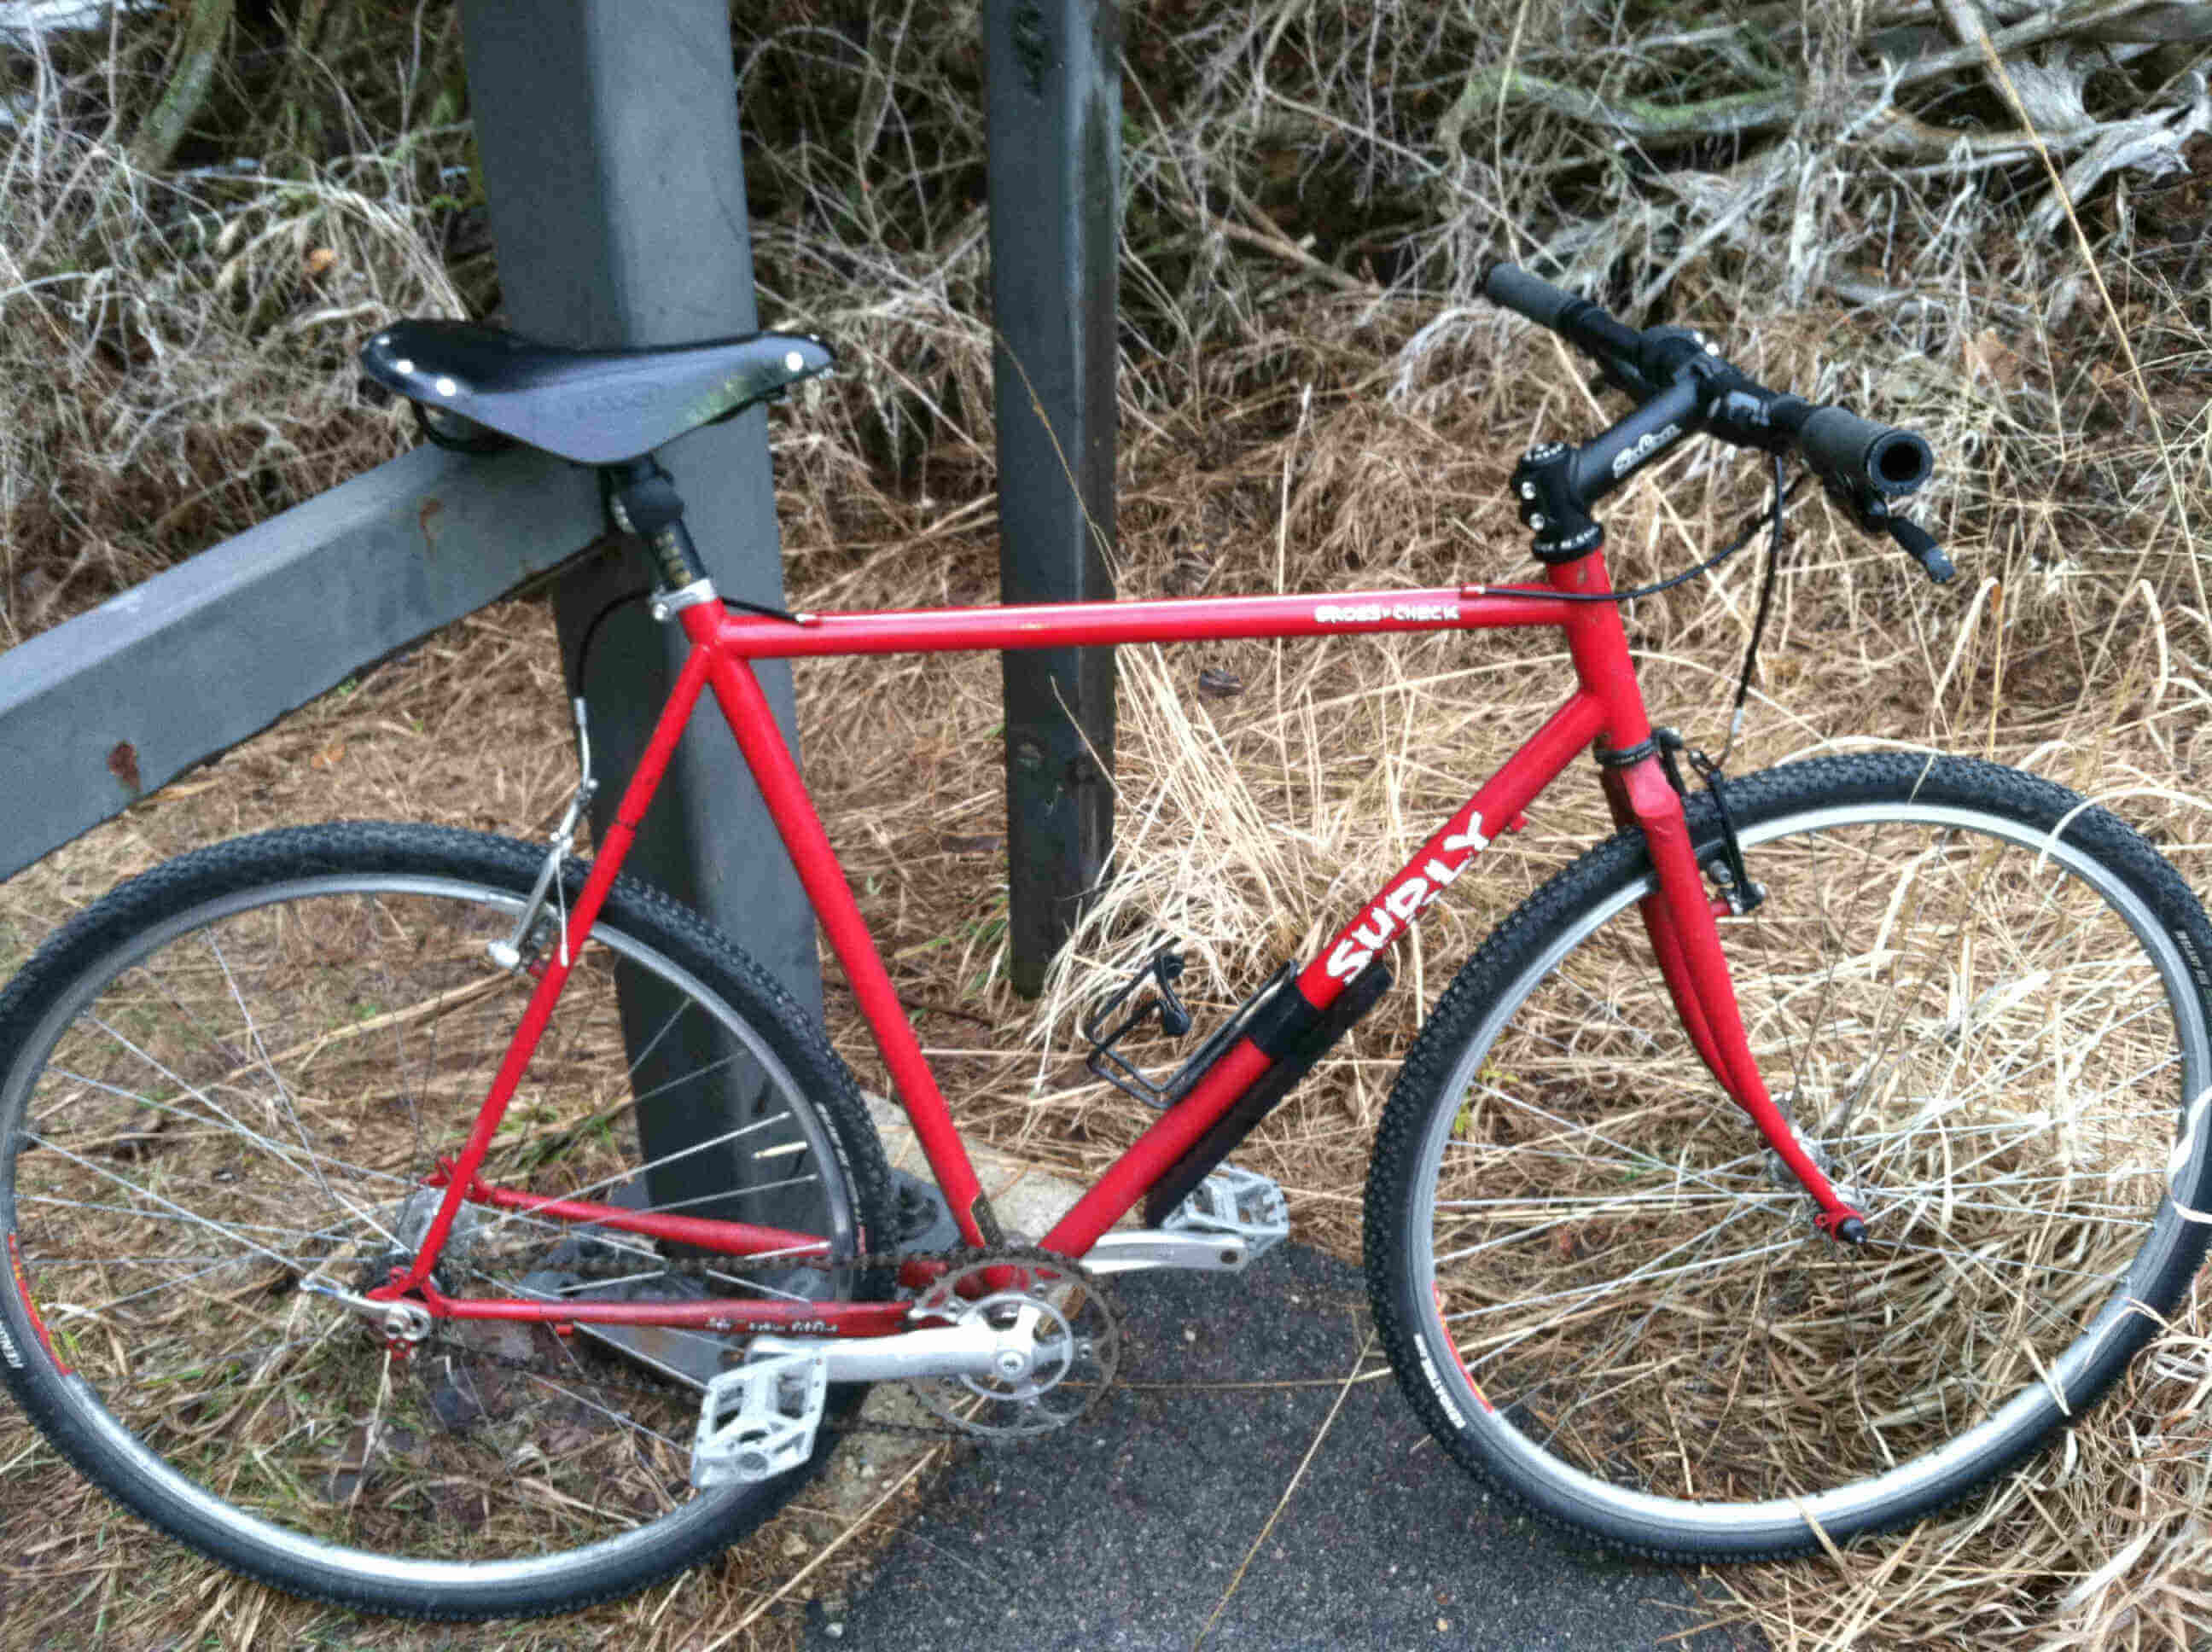 Right side view of a red Surly Cross Check bike, leaning on a steel gate post, with tall brown grass in the background